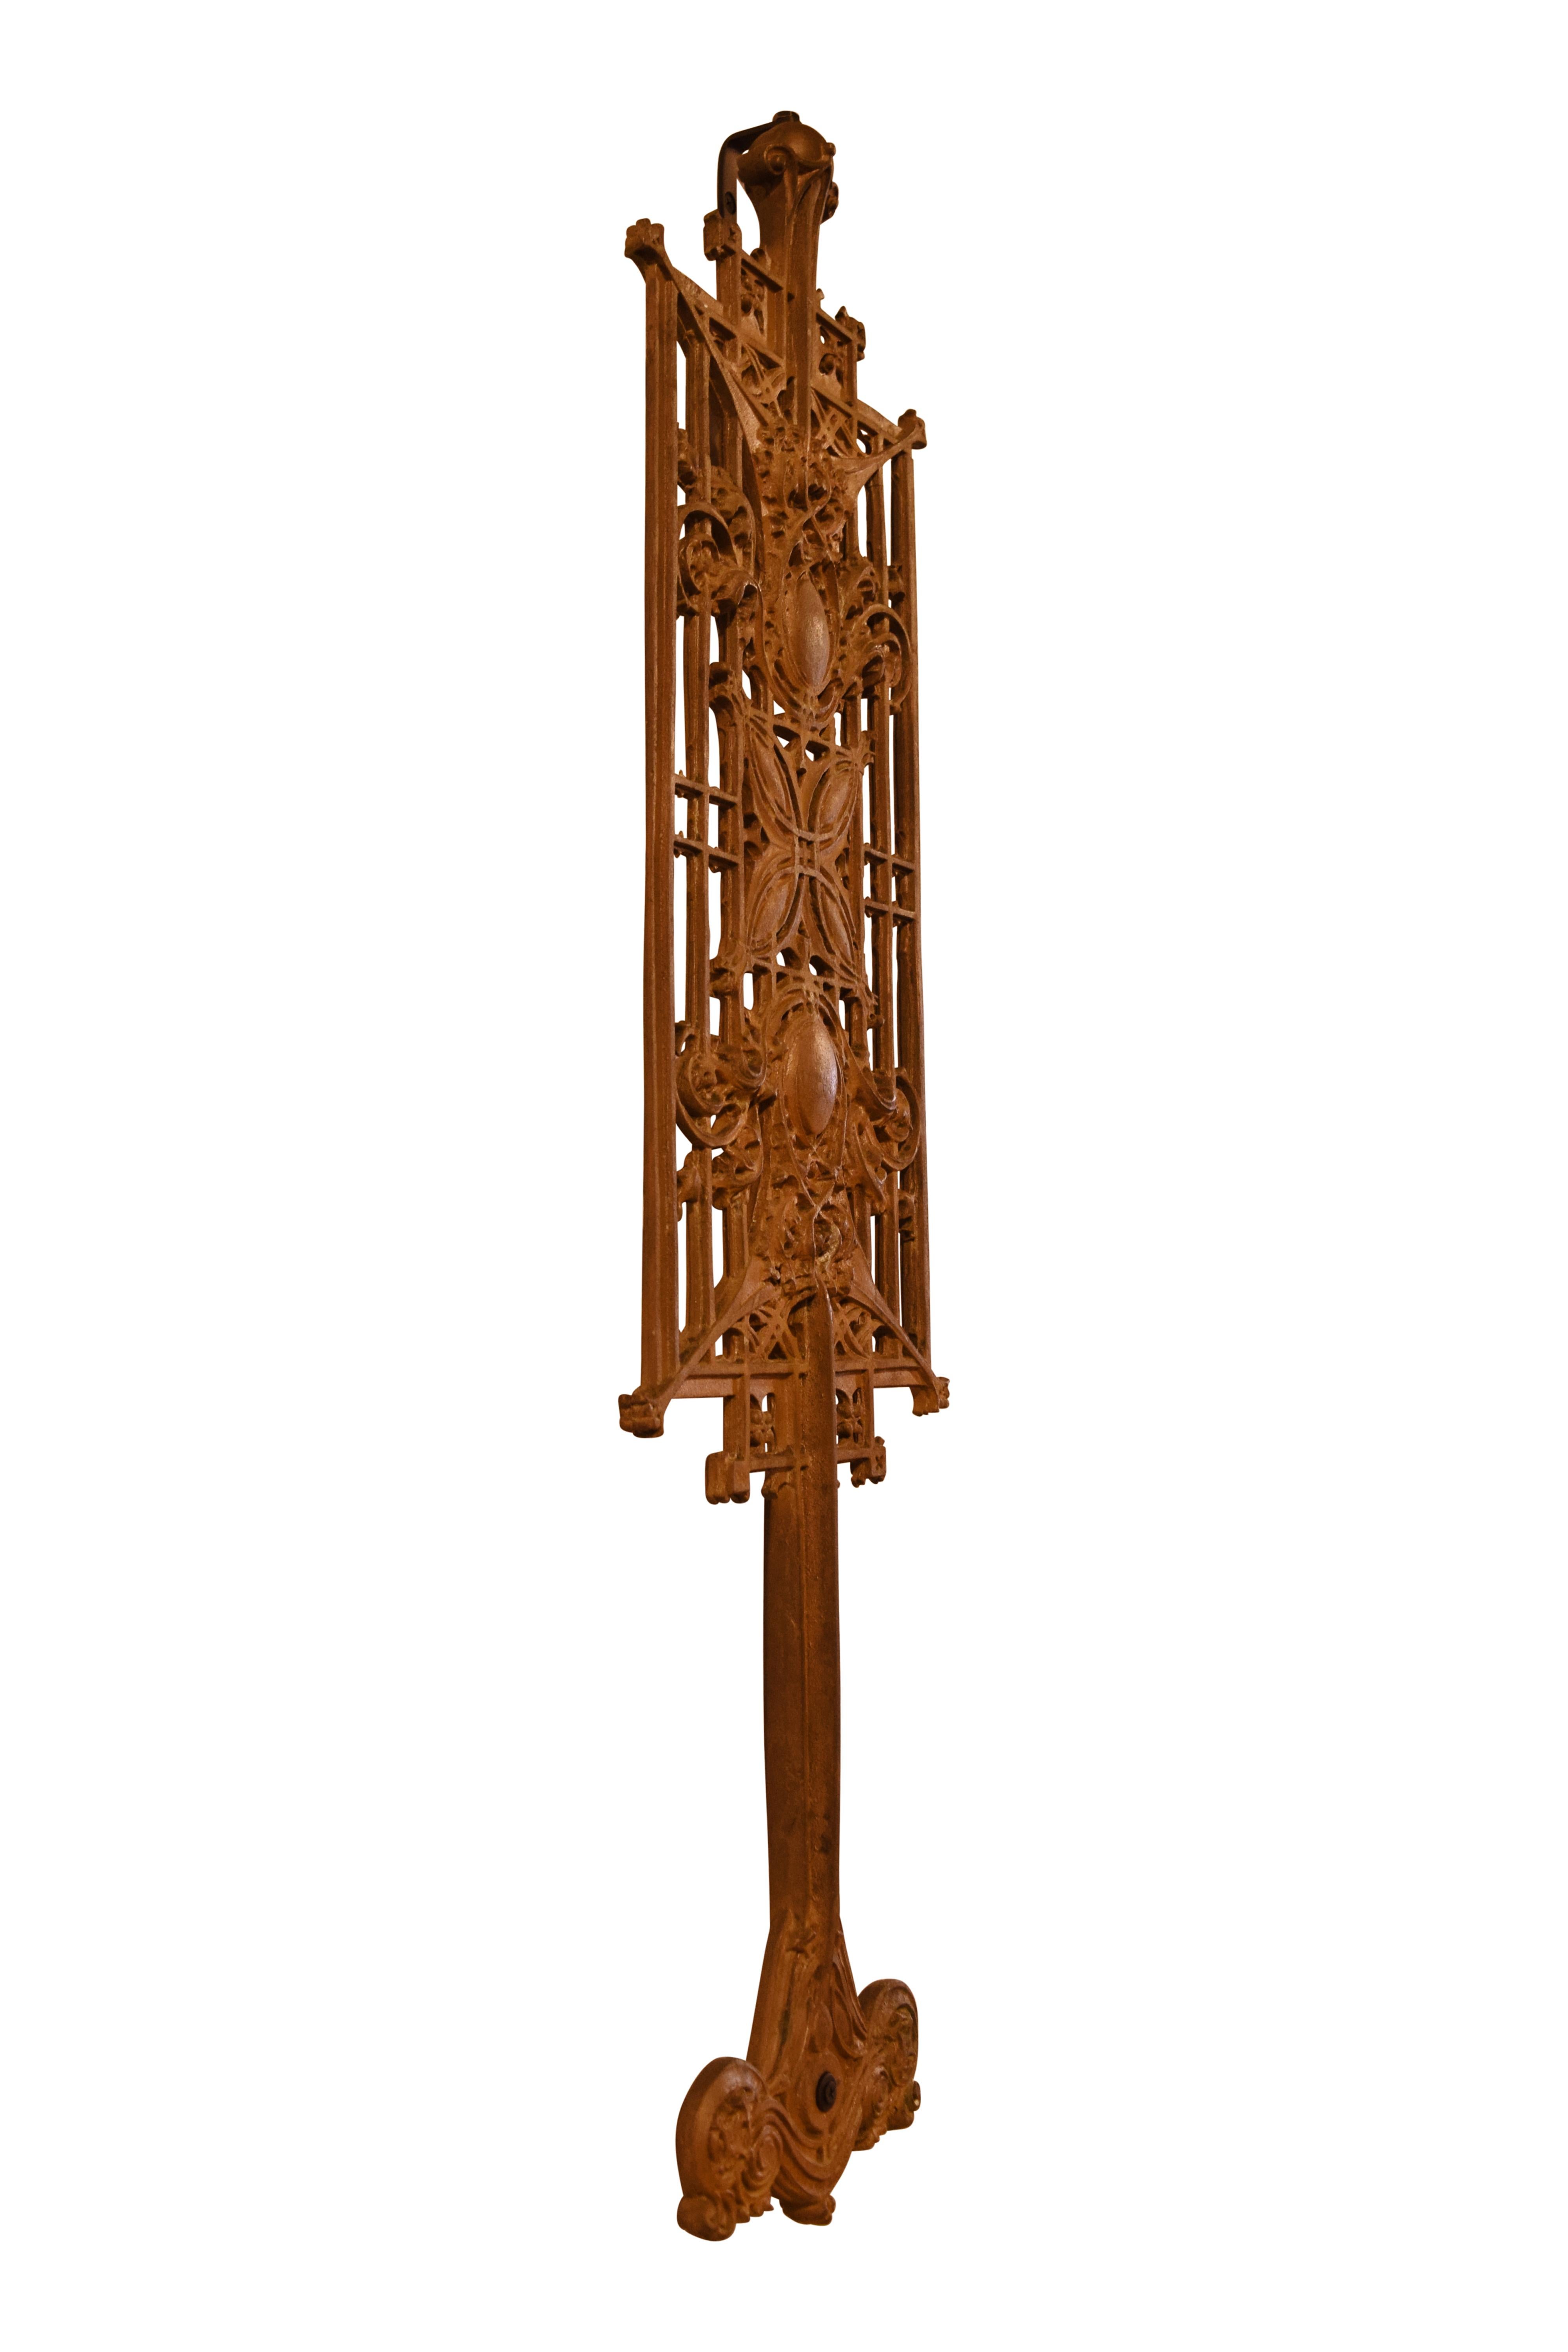 American Sullivan Designed Stair Baluster from Schlesinger and Mayer Department Store 